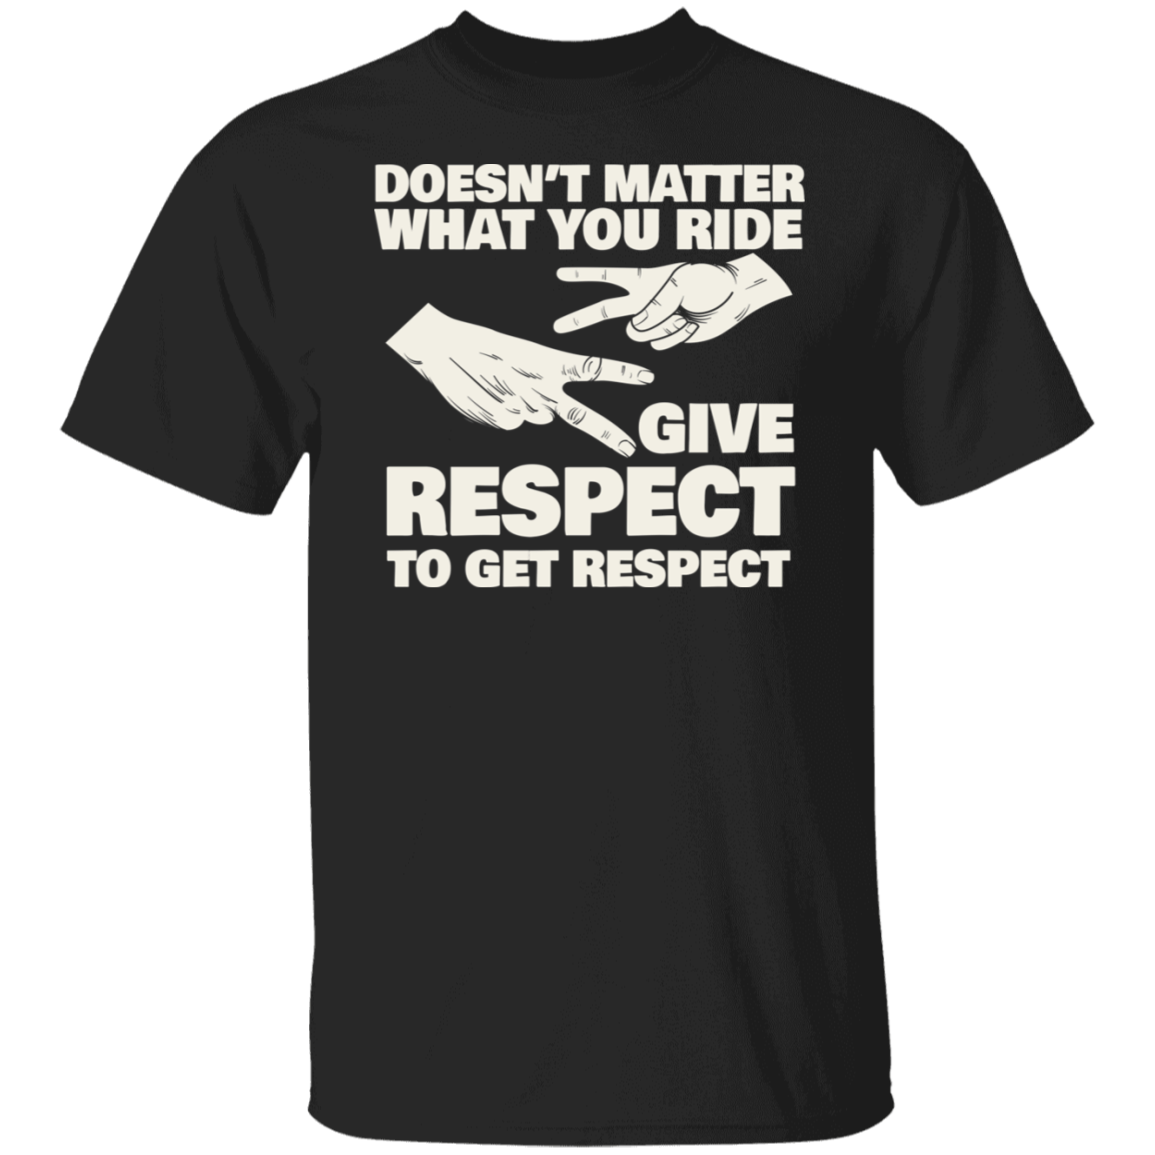 Doesn’t matter what you ride, give respect to get respect Biker Shirt